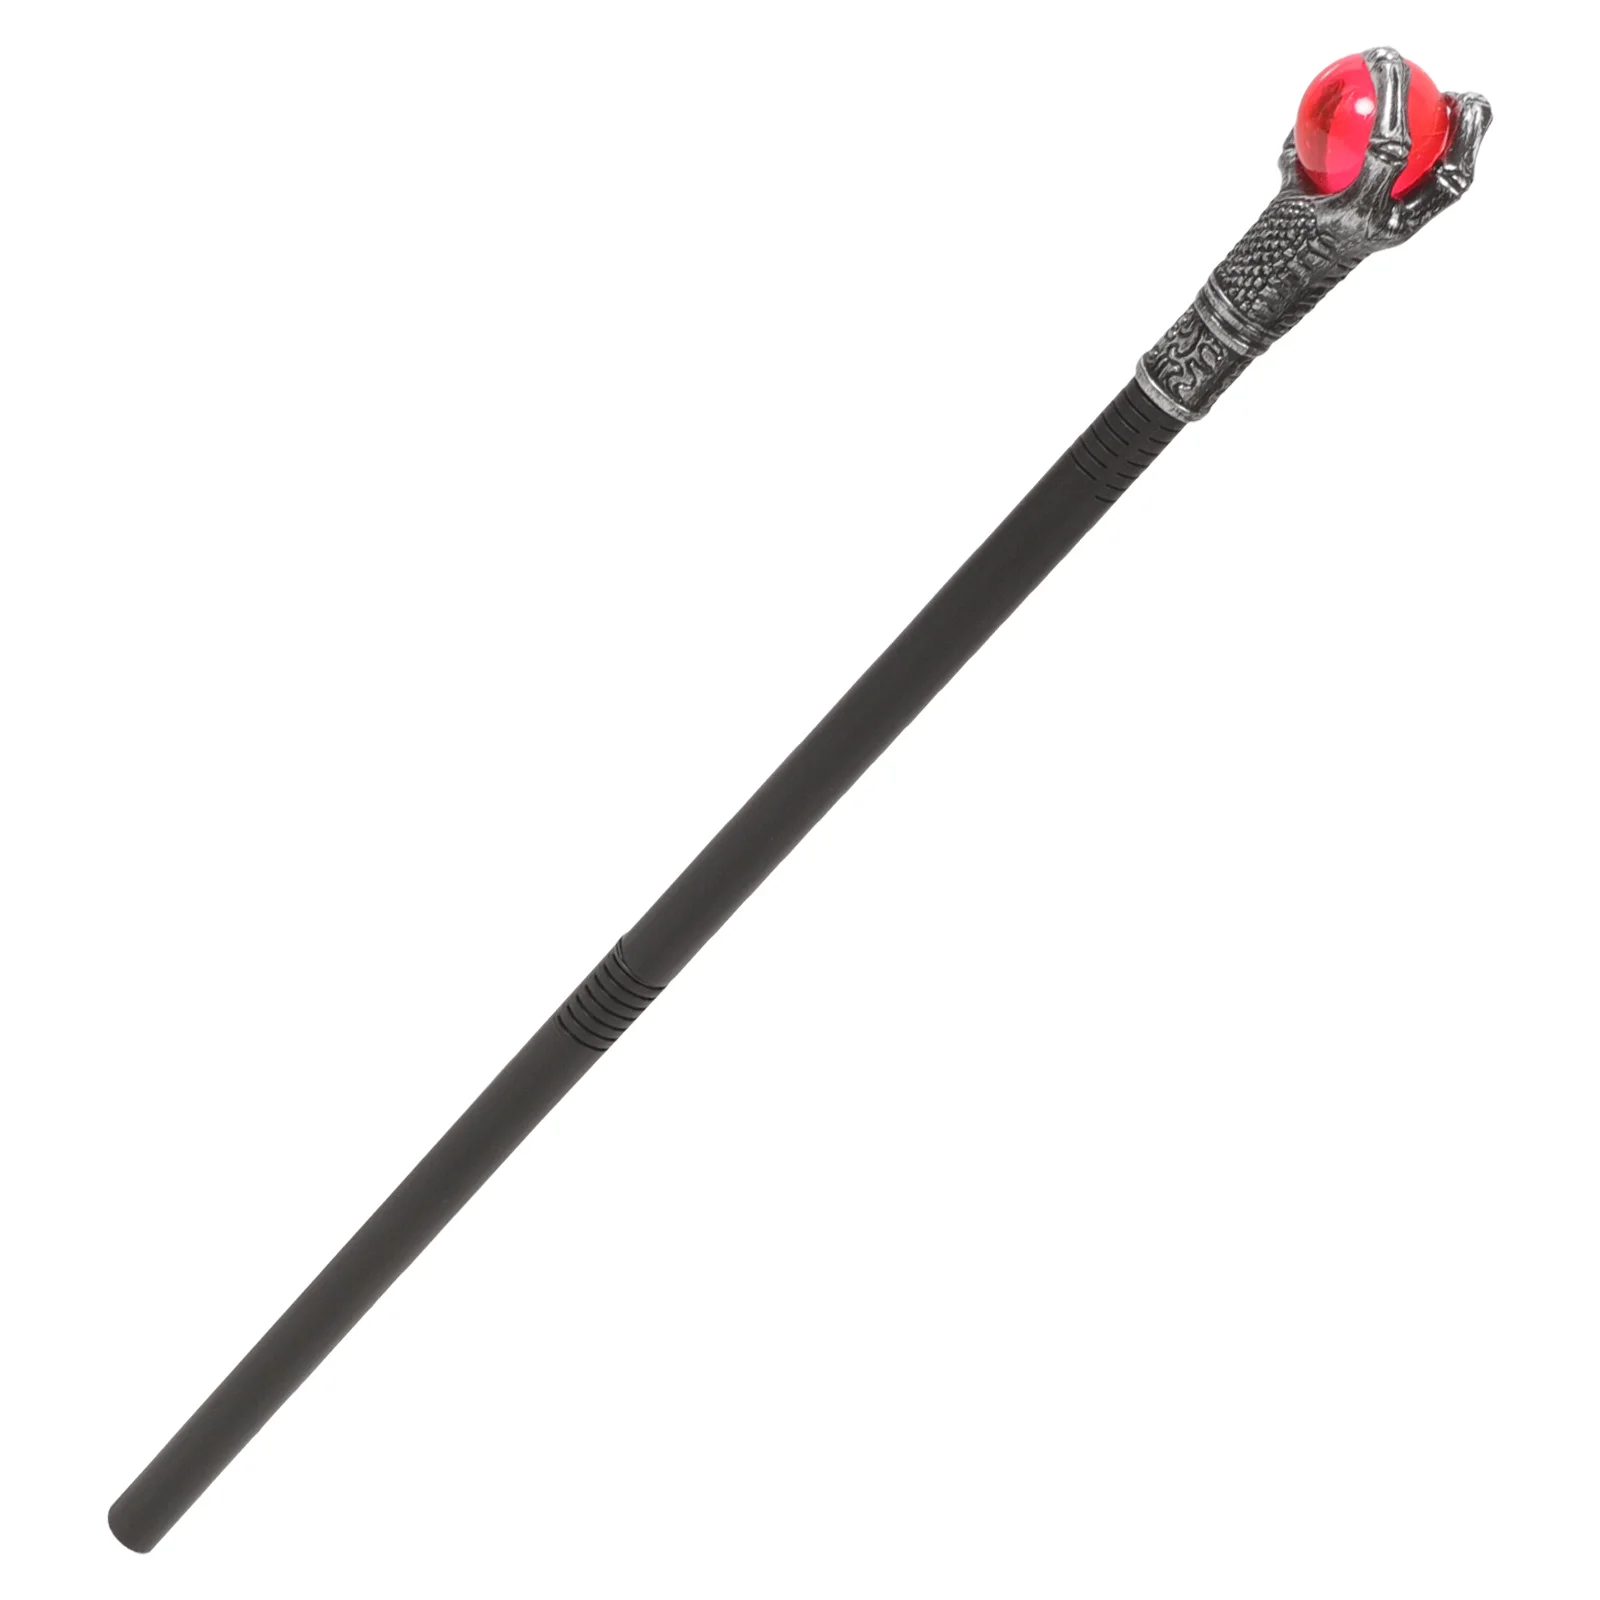 Cosplay Wand Prop Party Cosplay Wand Halloween Walk Stick Prop Performance Cane cosplay cane walking stick party cosplay wand halloween cane prop costume prop